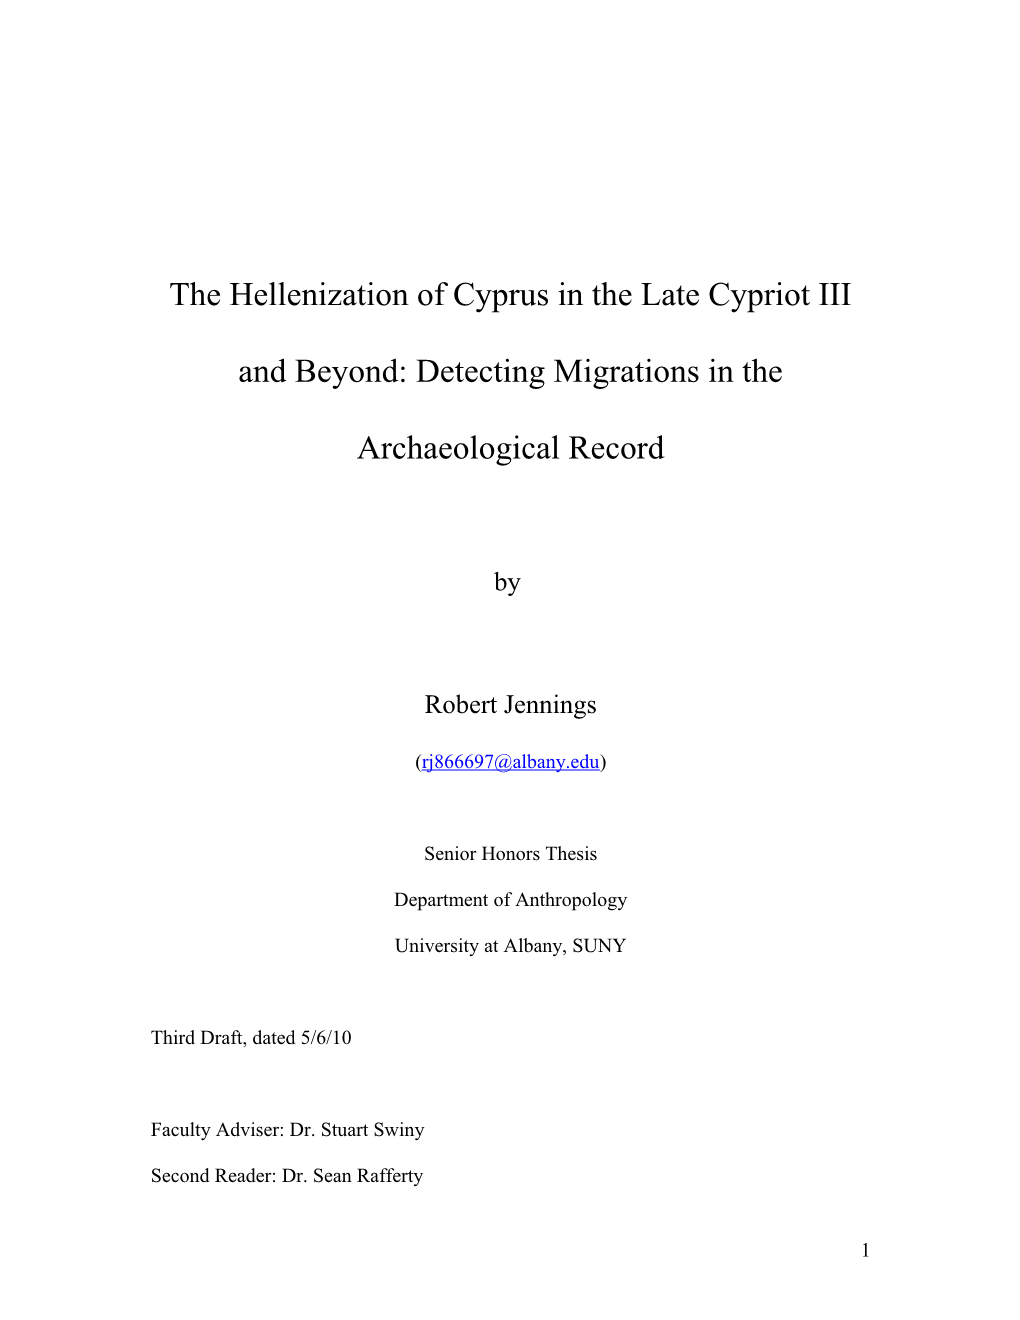 The Hellenization of Cyprus in the Late Cypriot III and Beyond: Detecting Ethnicity In